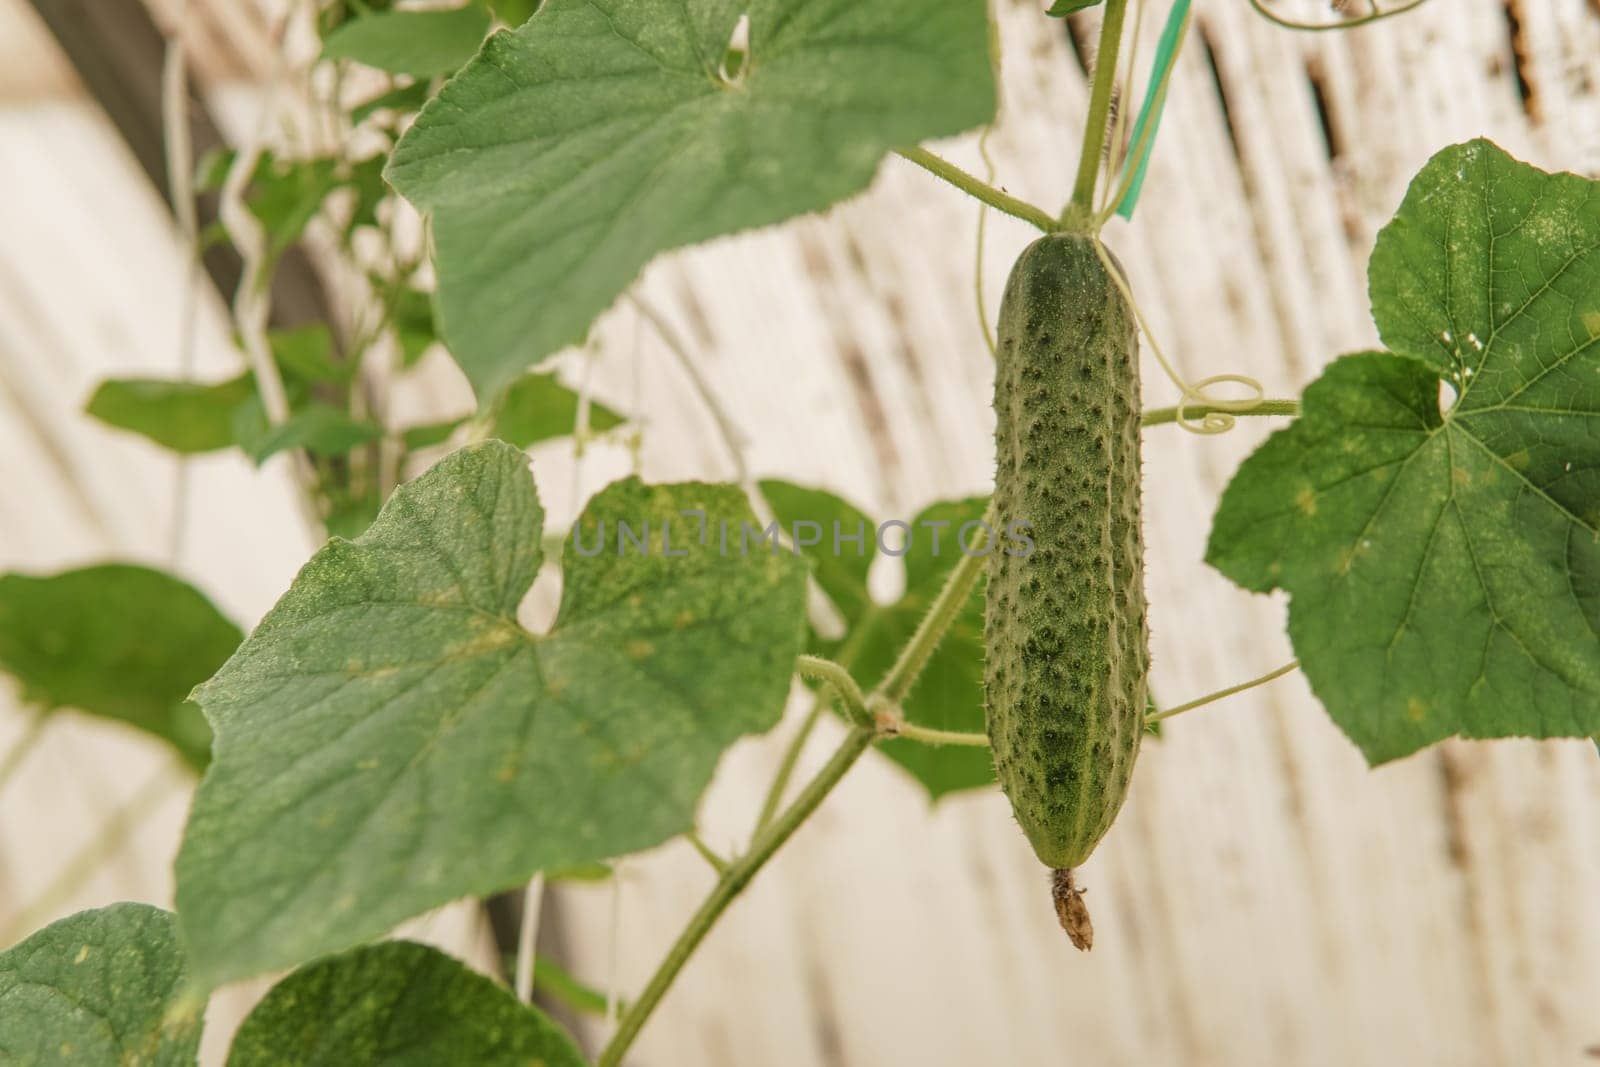 Cucumbers hang on a branch in the greenhouse. The concept of gardening and life in the country